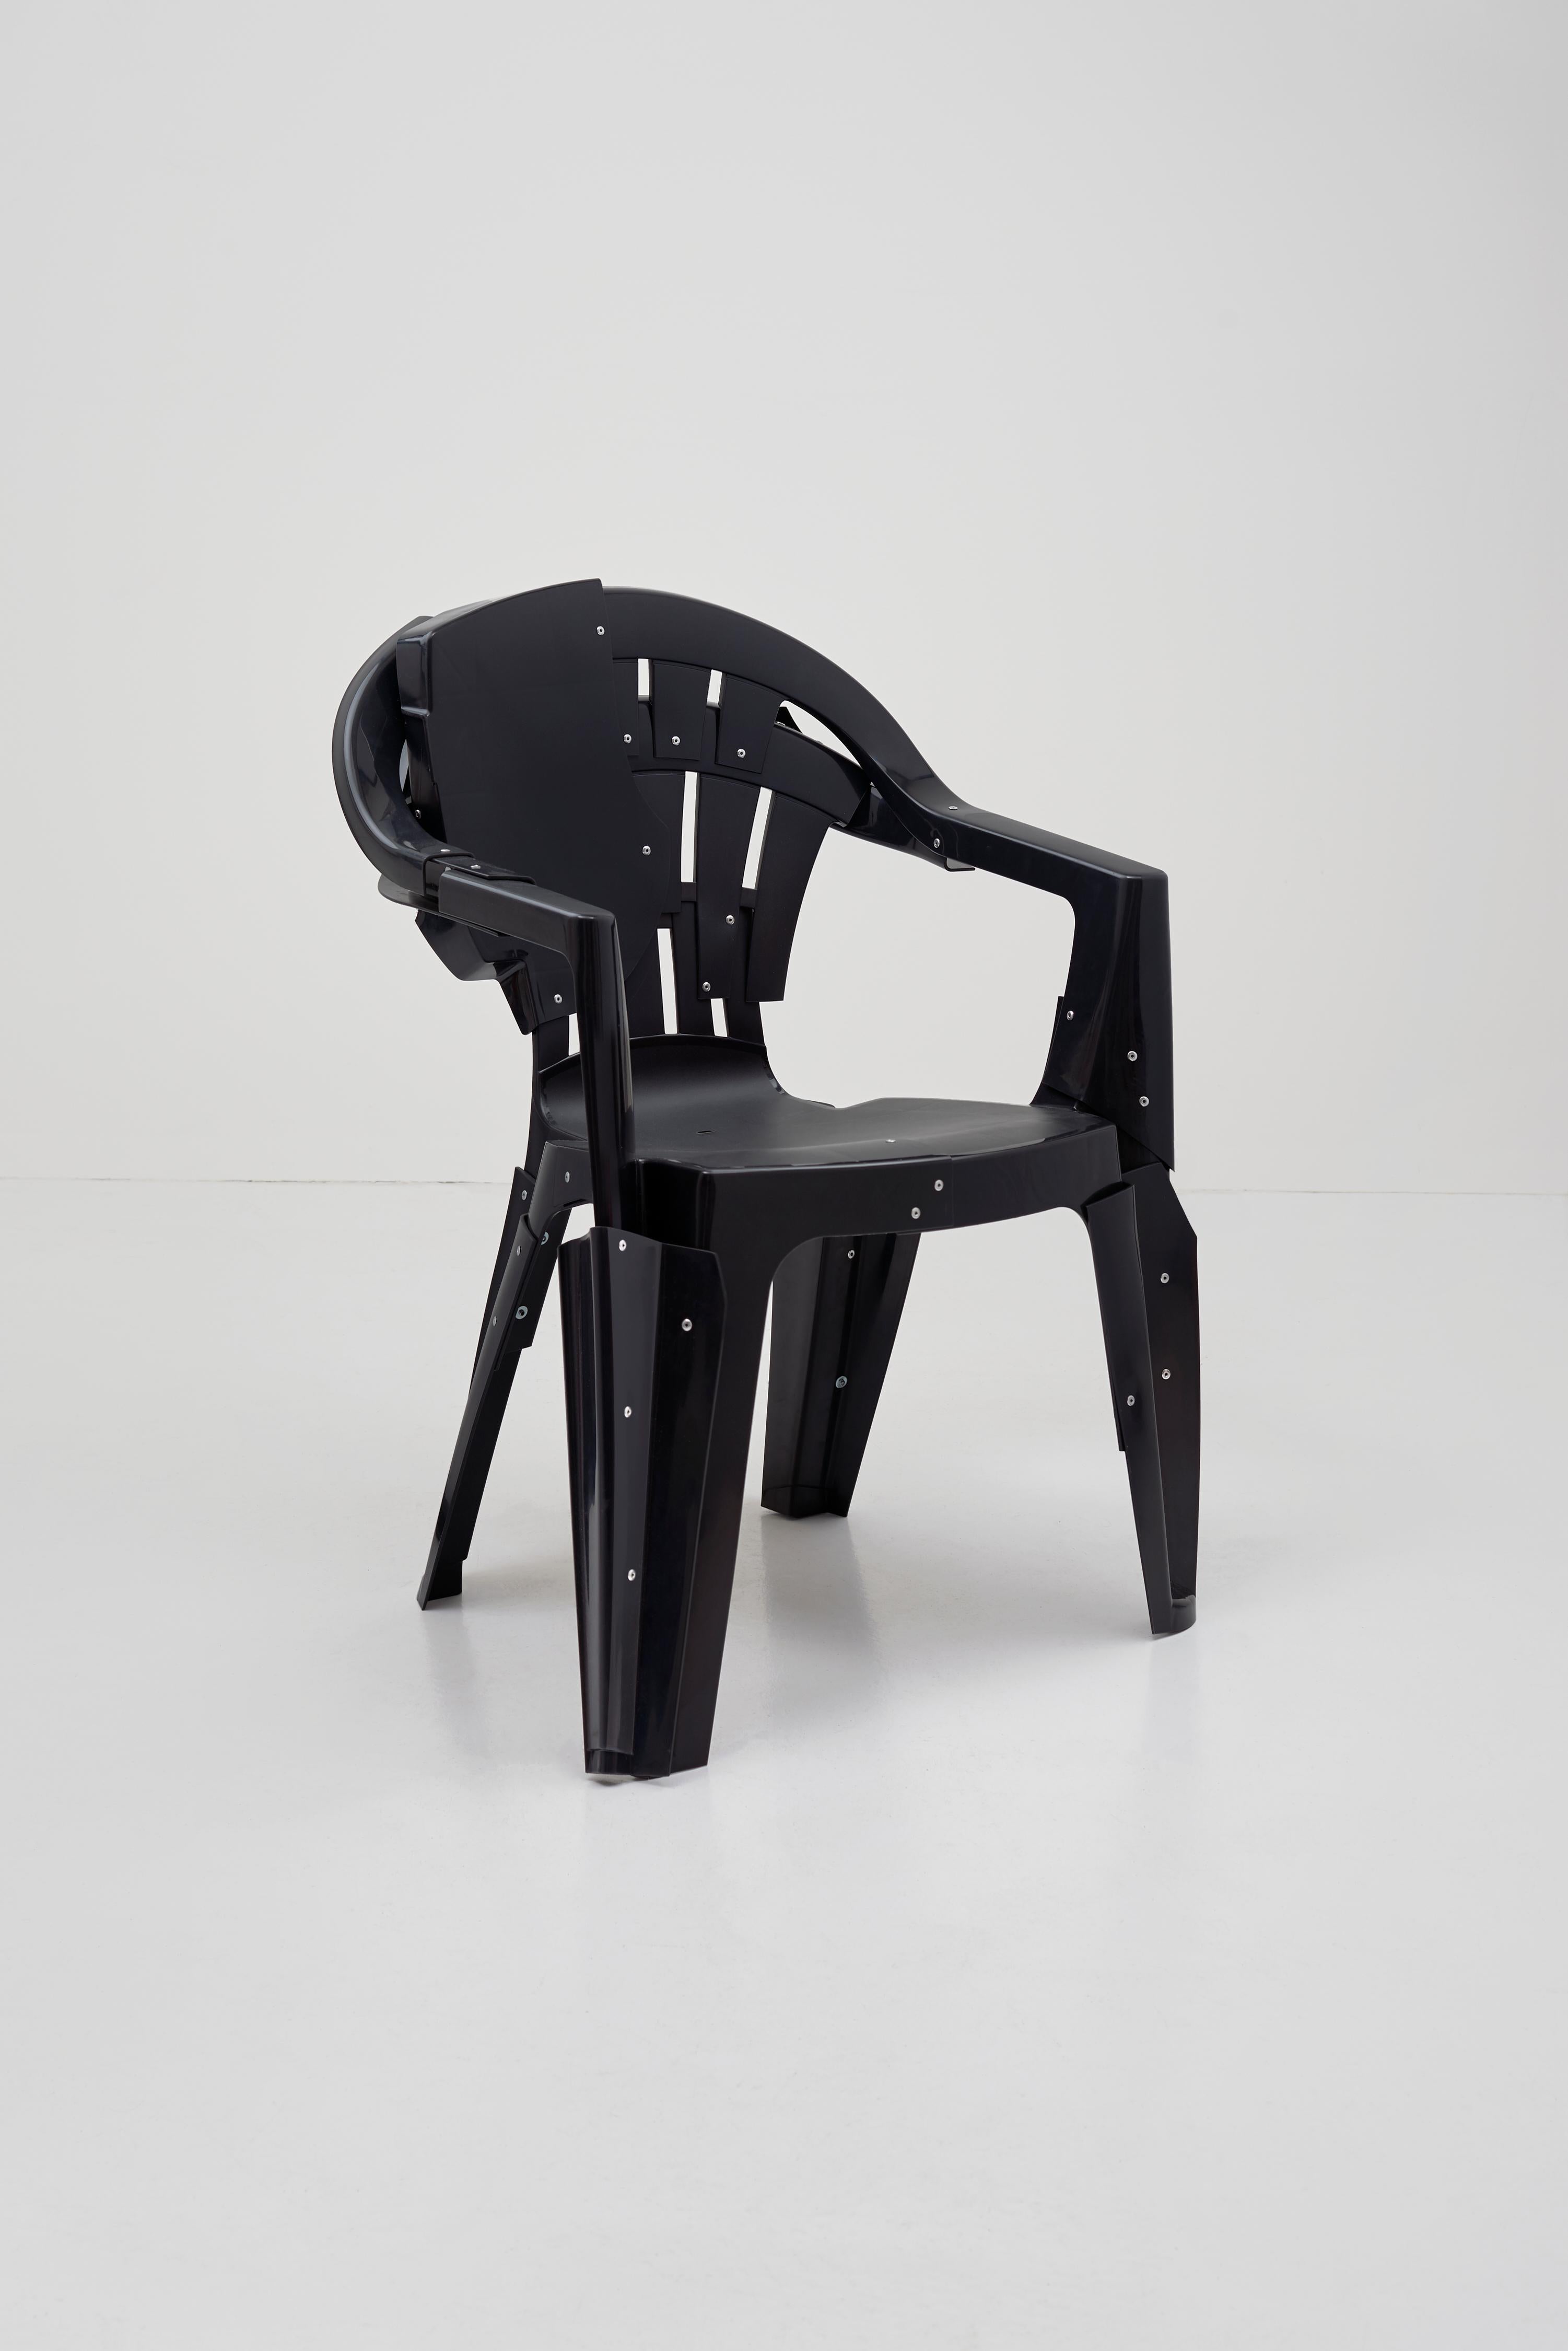 In copytopia, Pierre Castignola questions the benefits of the patent as part of the intellectual property system using one of the most recognizable objects of our time, the plastic garden armchair. Though nobody knows who originally created the